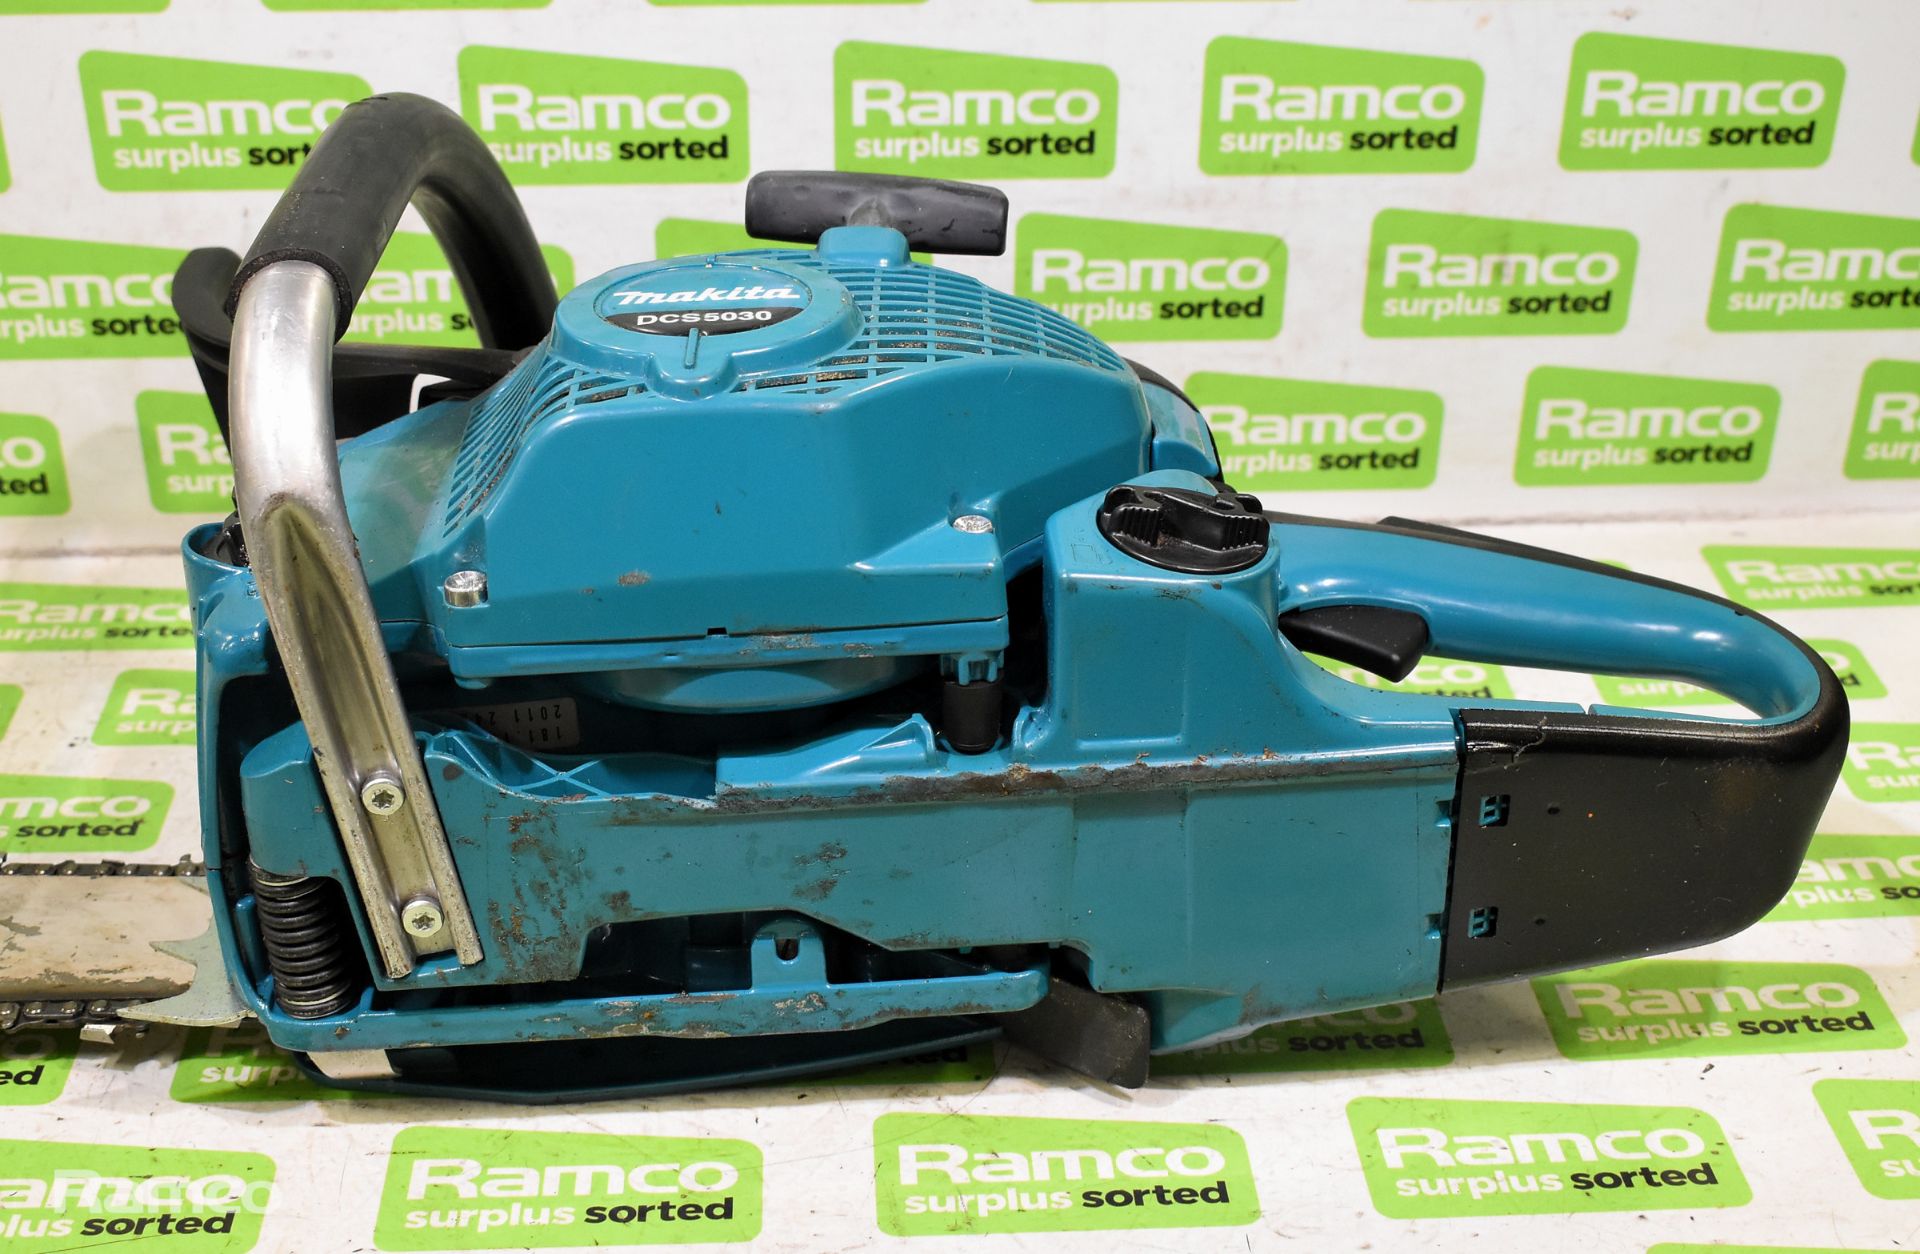 Makita DCS5030 50cc petrol chainsaw with guide and chain - AS SPARES & REPAIRS - Image 6 of 6